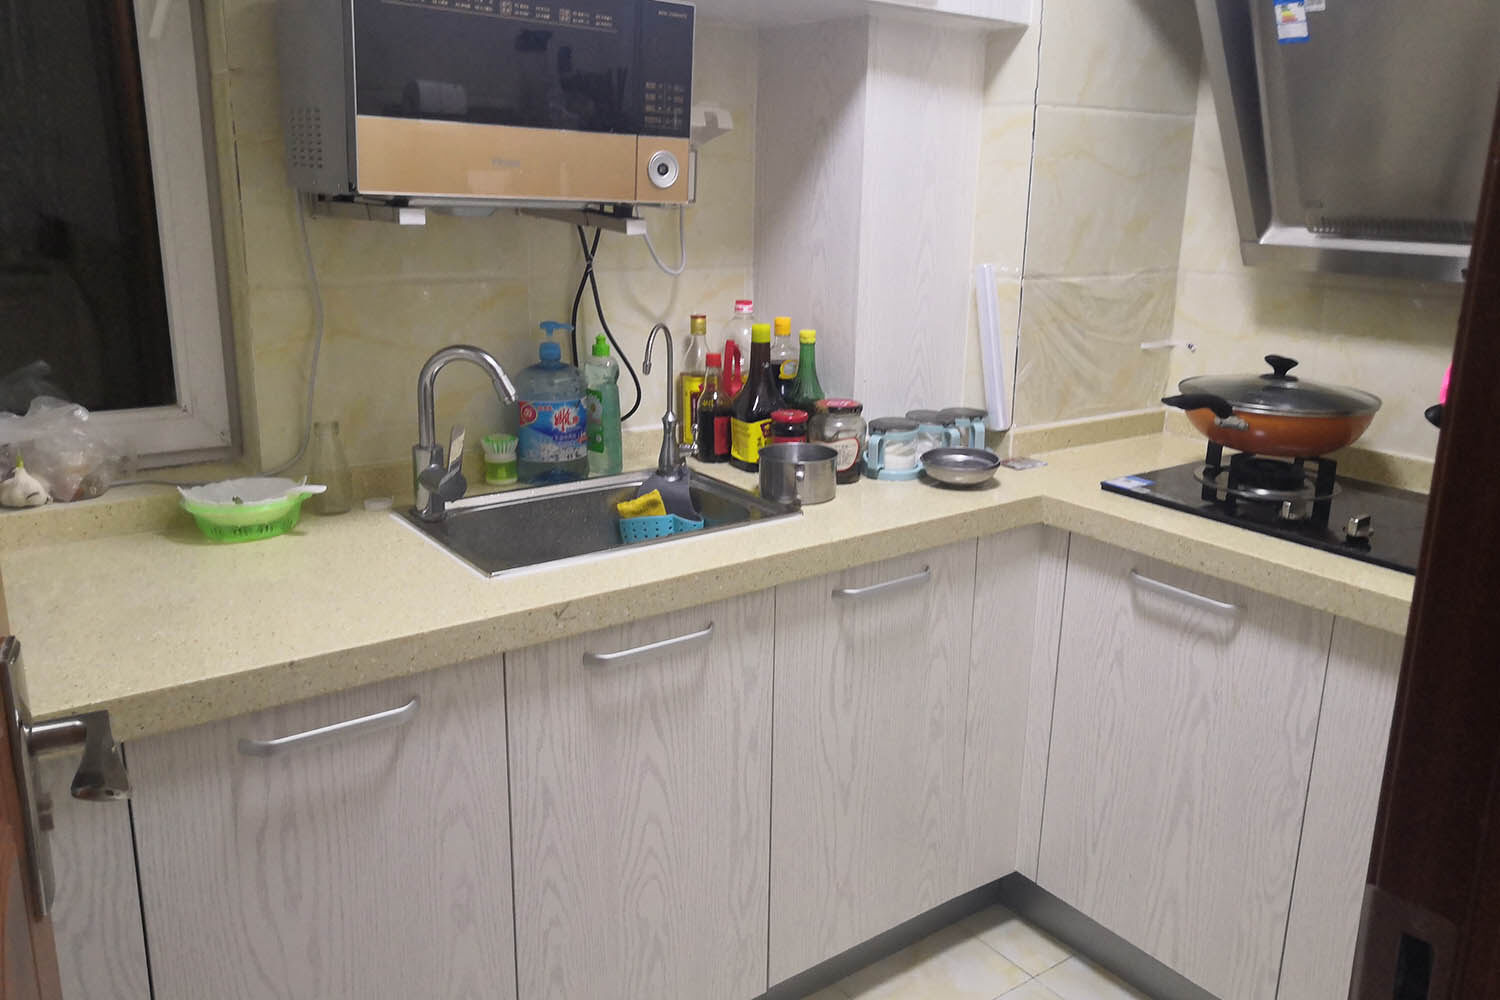 The kitchen in a teacher's apartment at the Beijing School